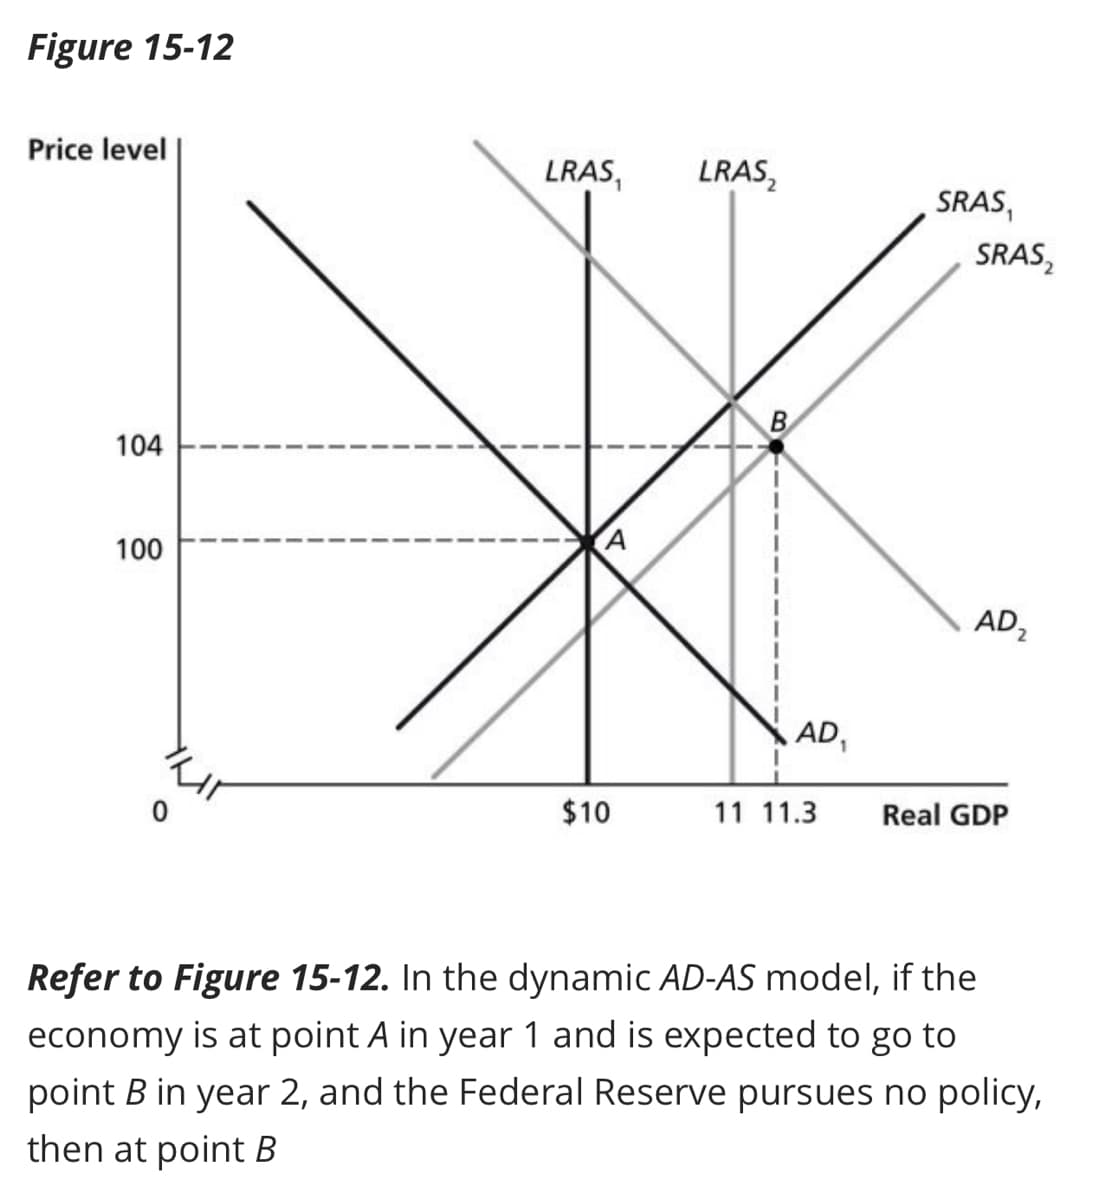 Figure 15-12
Price level
LRAS, LRAS₂
B
*
$10
104
100
Thr
AD₁
11 11.3
SRAS,
SRAS₂
AD₂
Real GDP
Refer to Figure 15-12. In the dynamic AD-AS model, if the
economy is at point A in year 1 and is expected to go to
point B in year 2, and the Federal Reserve pursues no policy,
then at point B